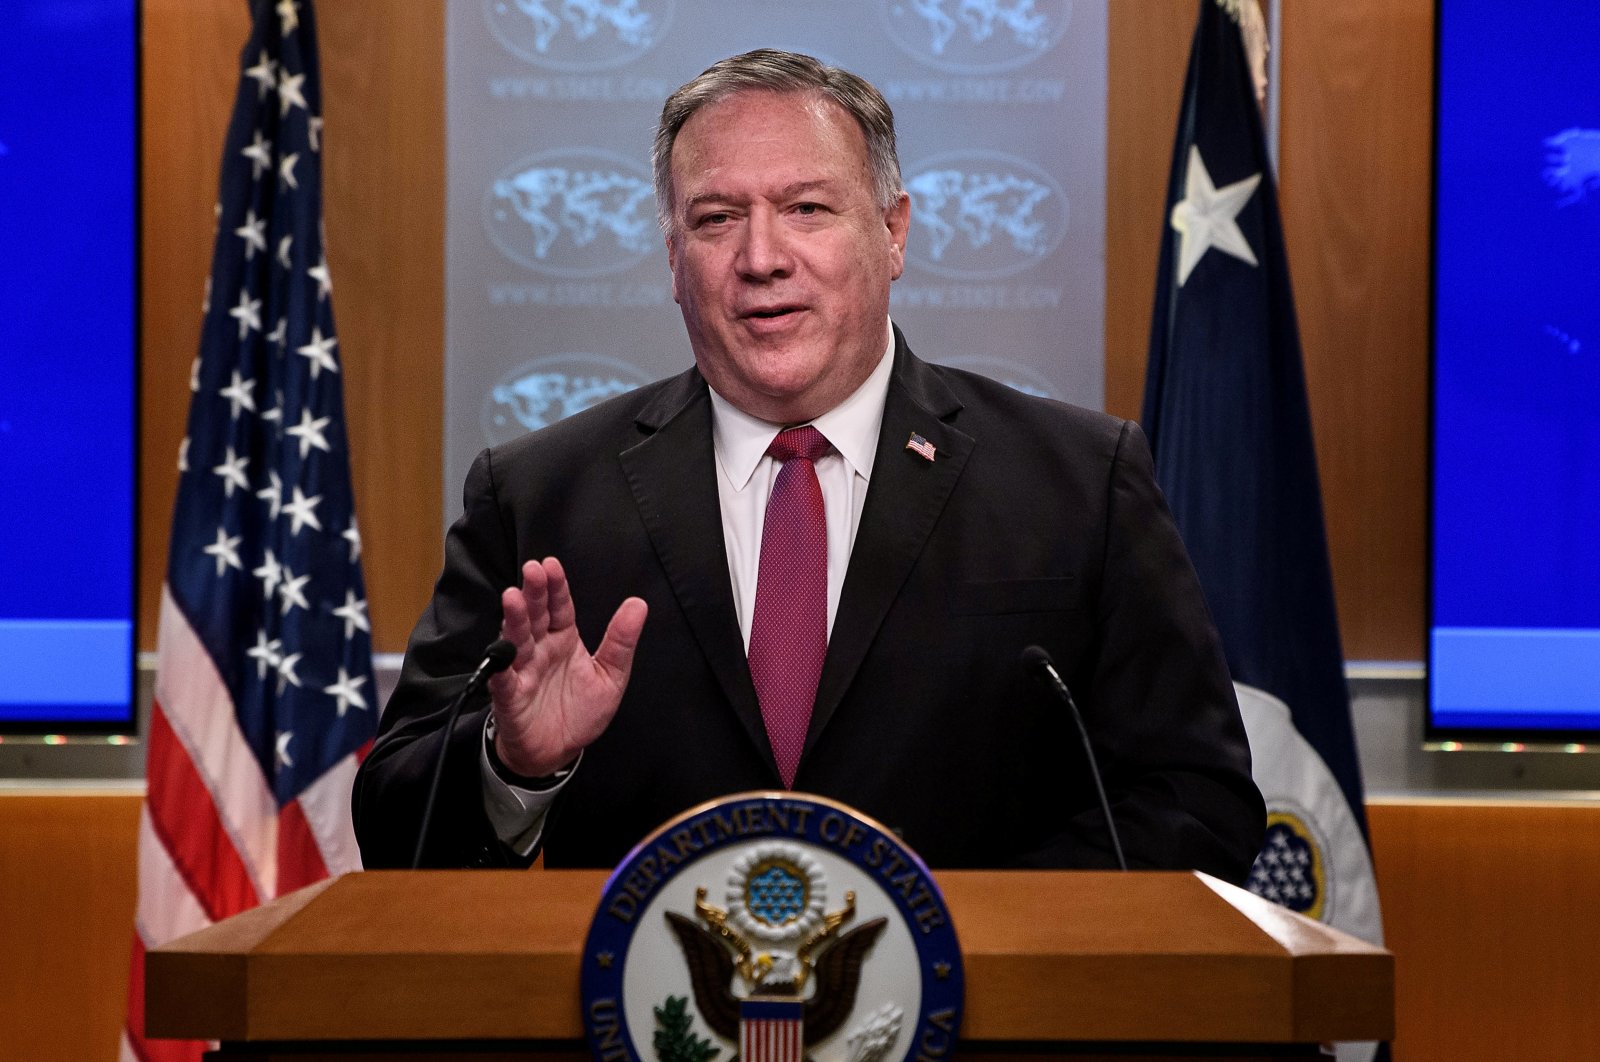 U.S. Secretary of State Mike Pompeo speaks at a news conference at the State Department in Washington, DC, U.S. October 21, 2020. (Reuters Photo)